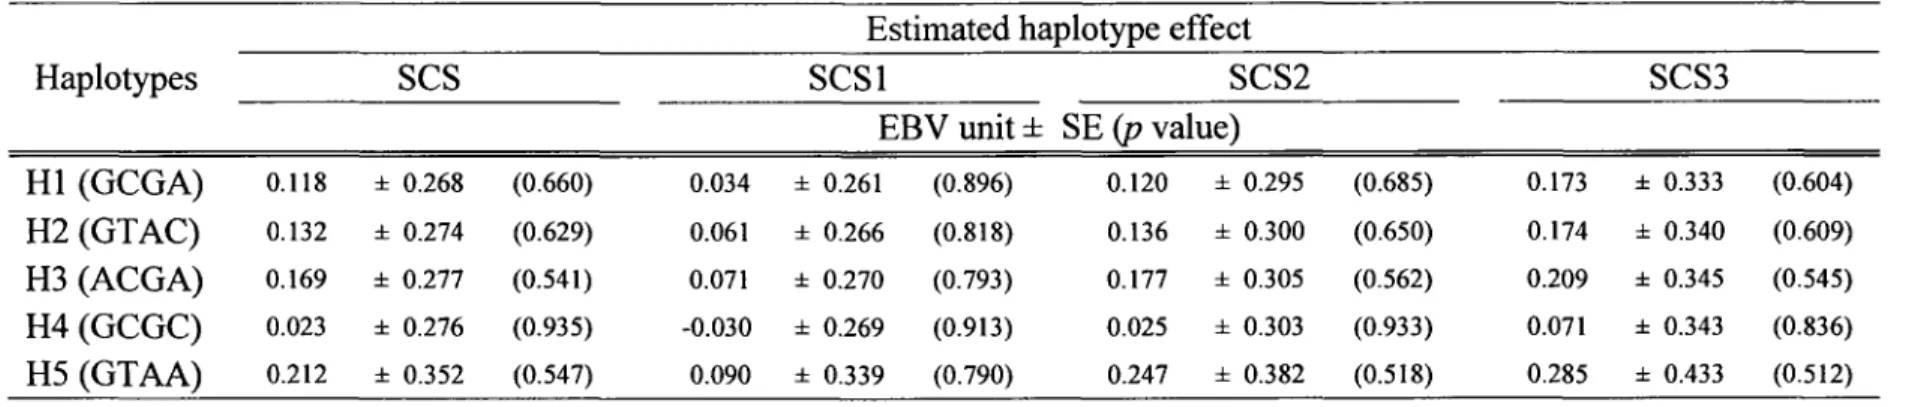 Table 7. Estimated haplotype effects on EBVs for SCS. 